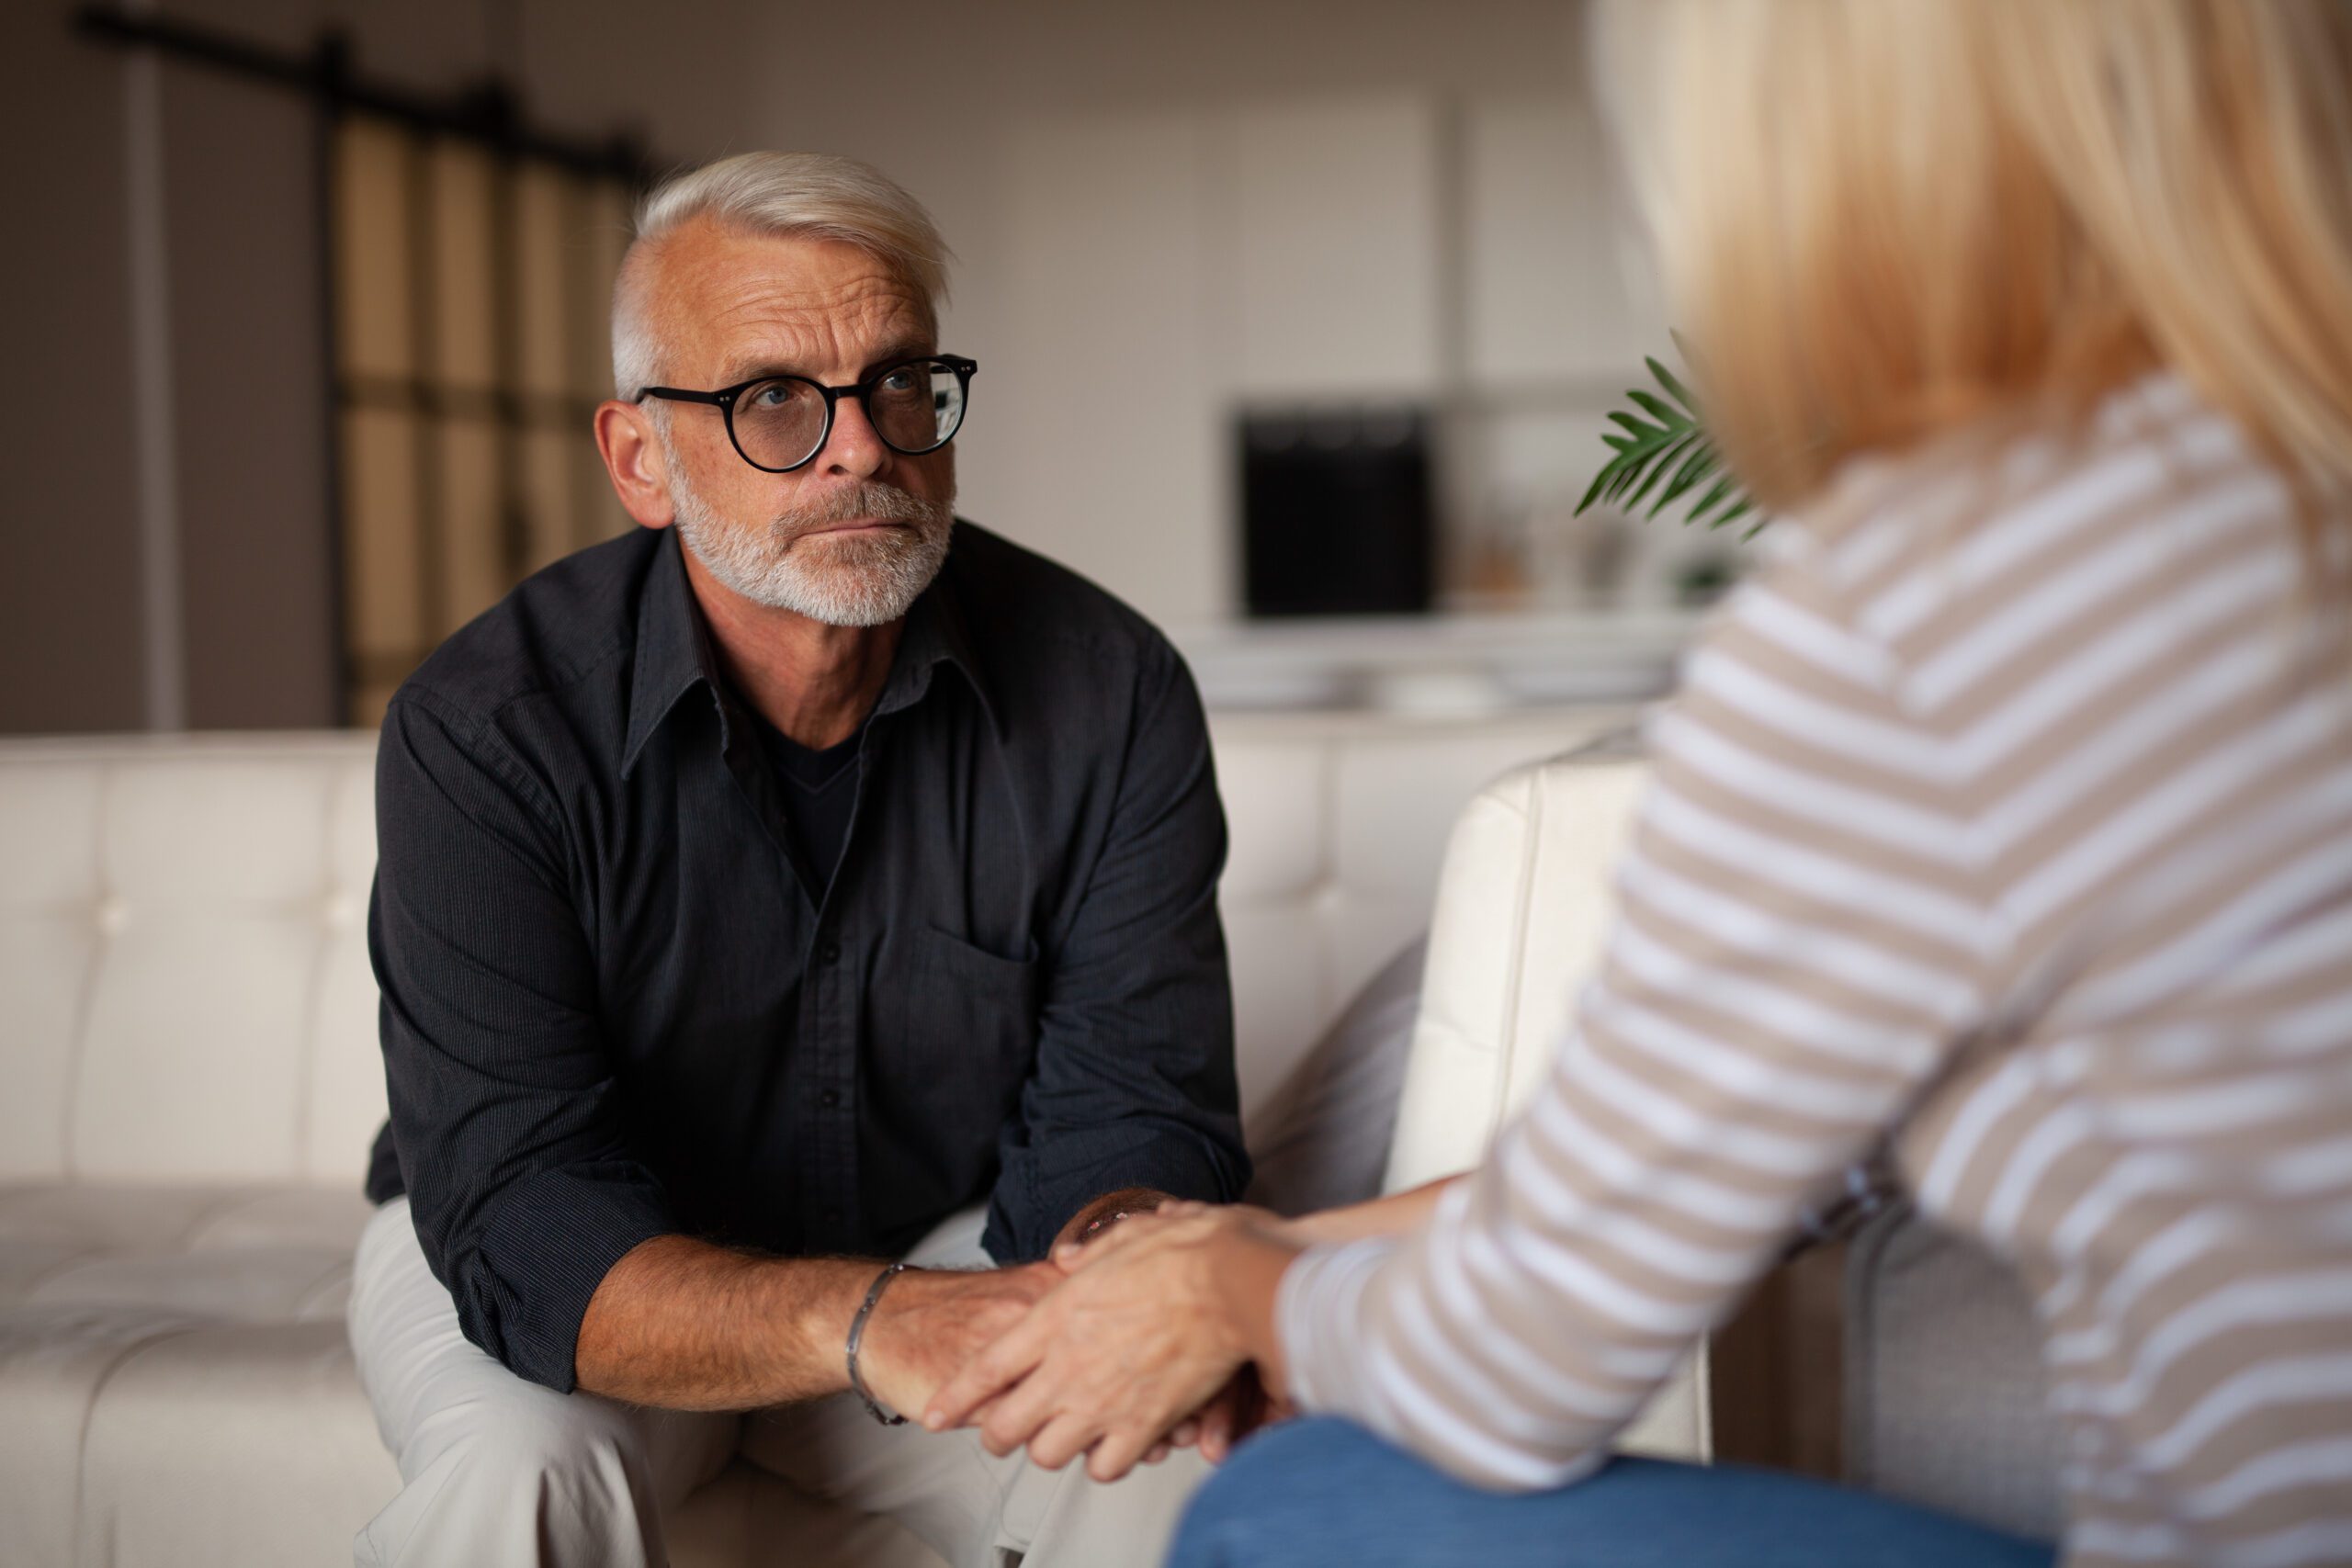 How to Help Your Loved One Return Home from Addiction Treatment, How Do I Help My Loved One After Addiction Treatment?,